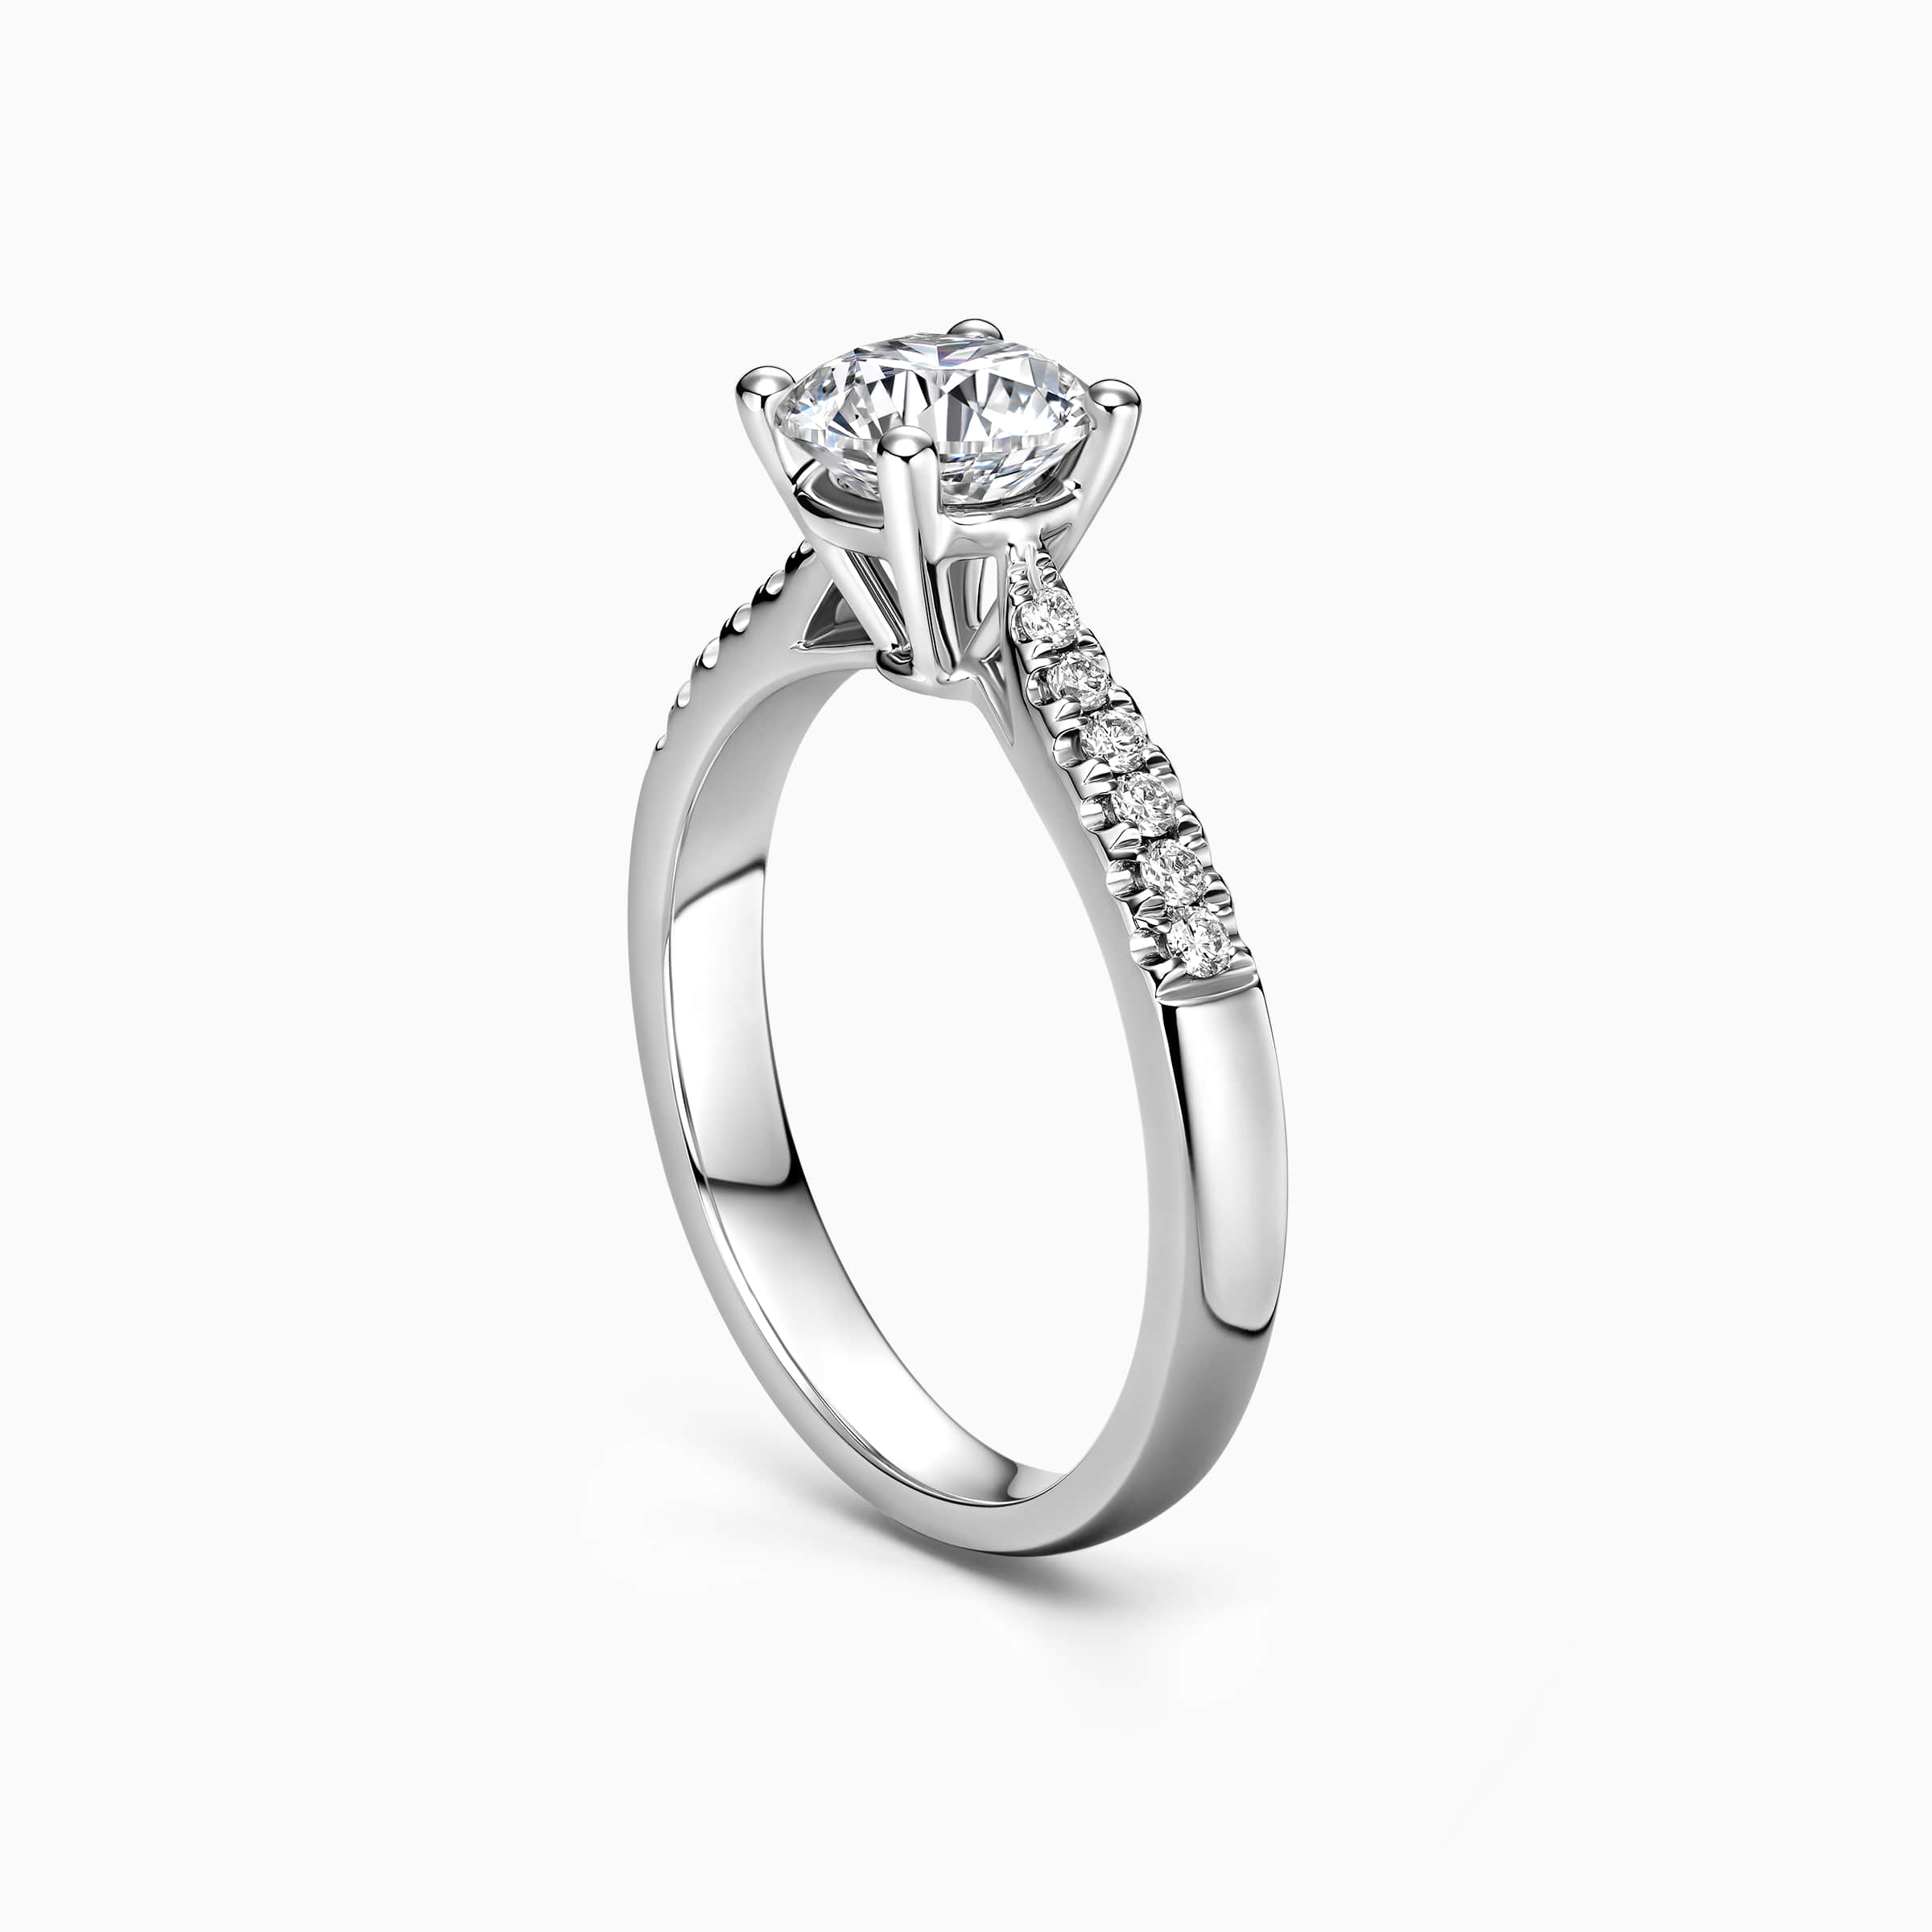 darry ring 4 prong engagement ring angle view